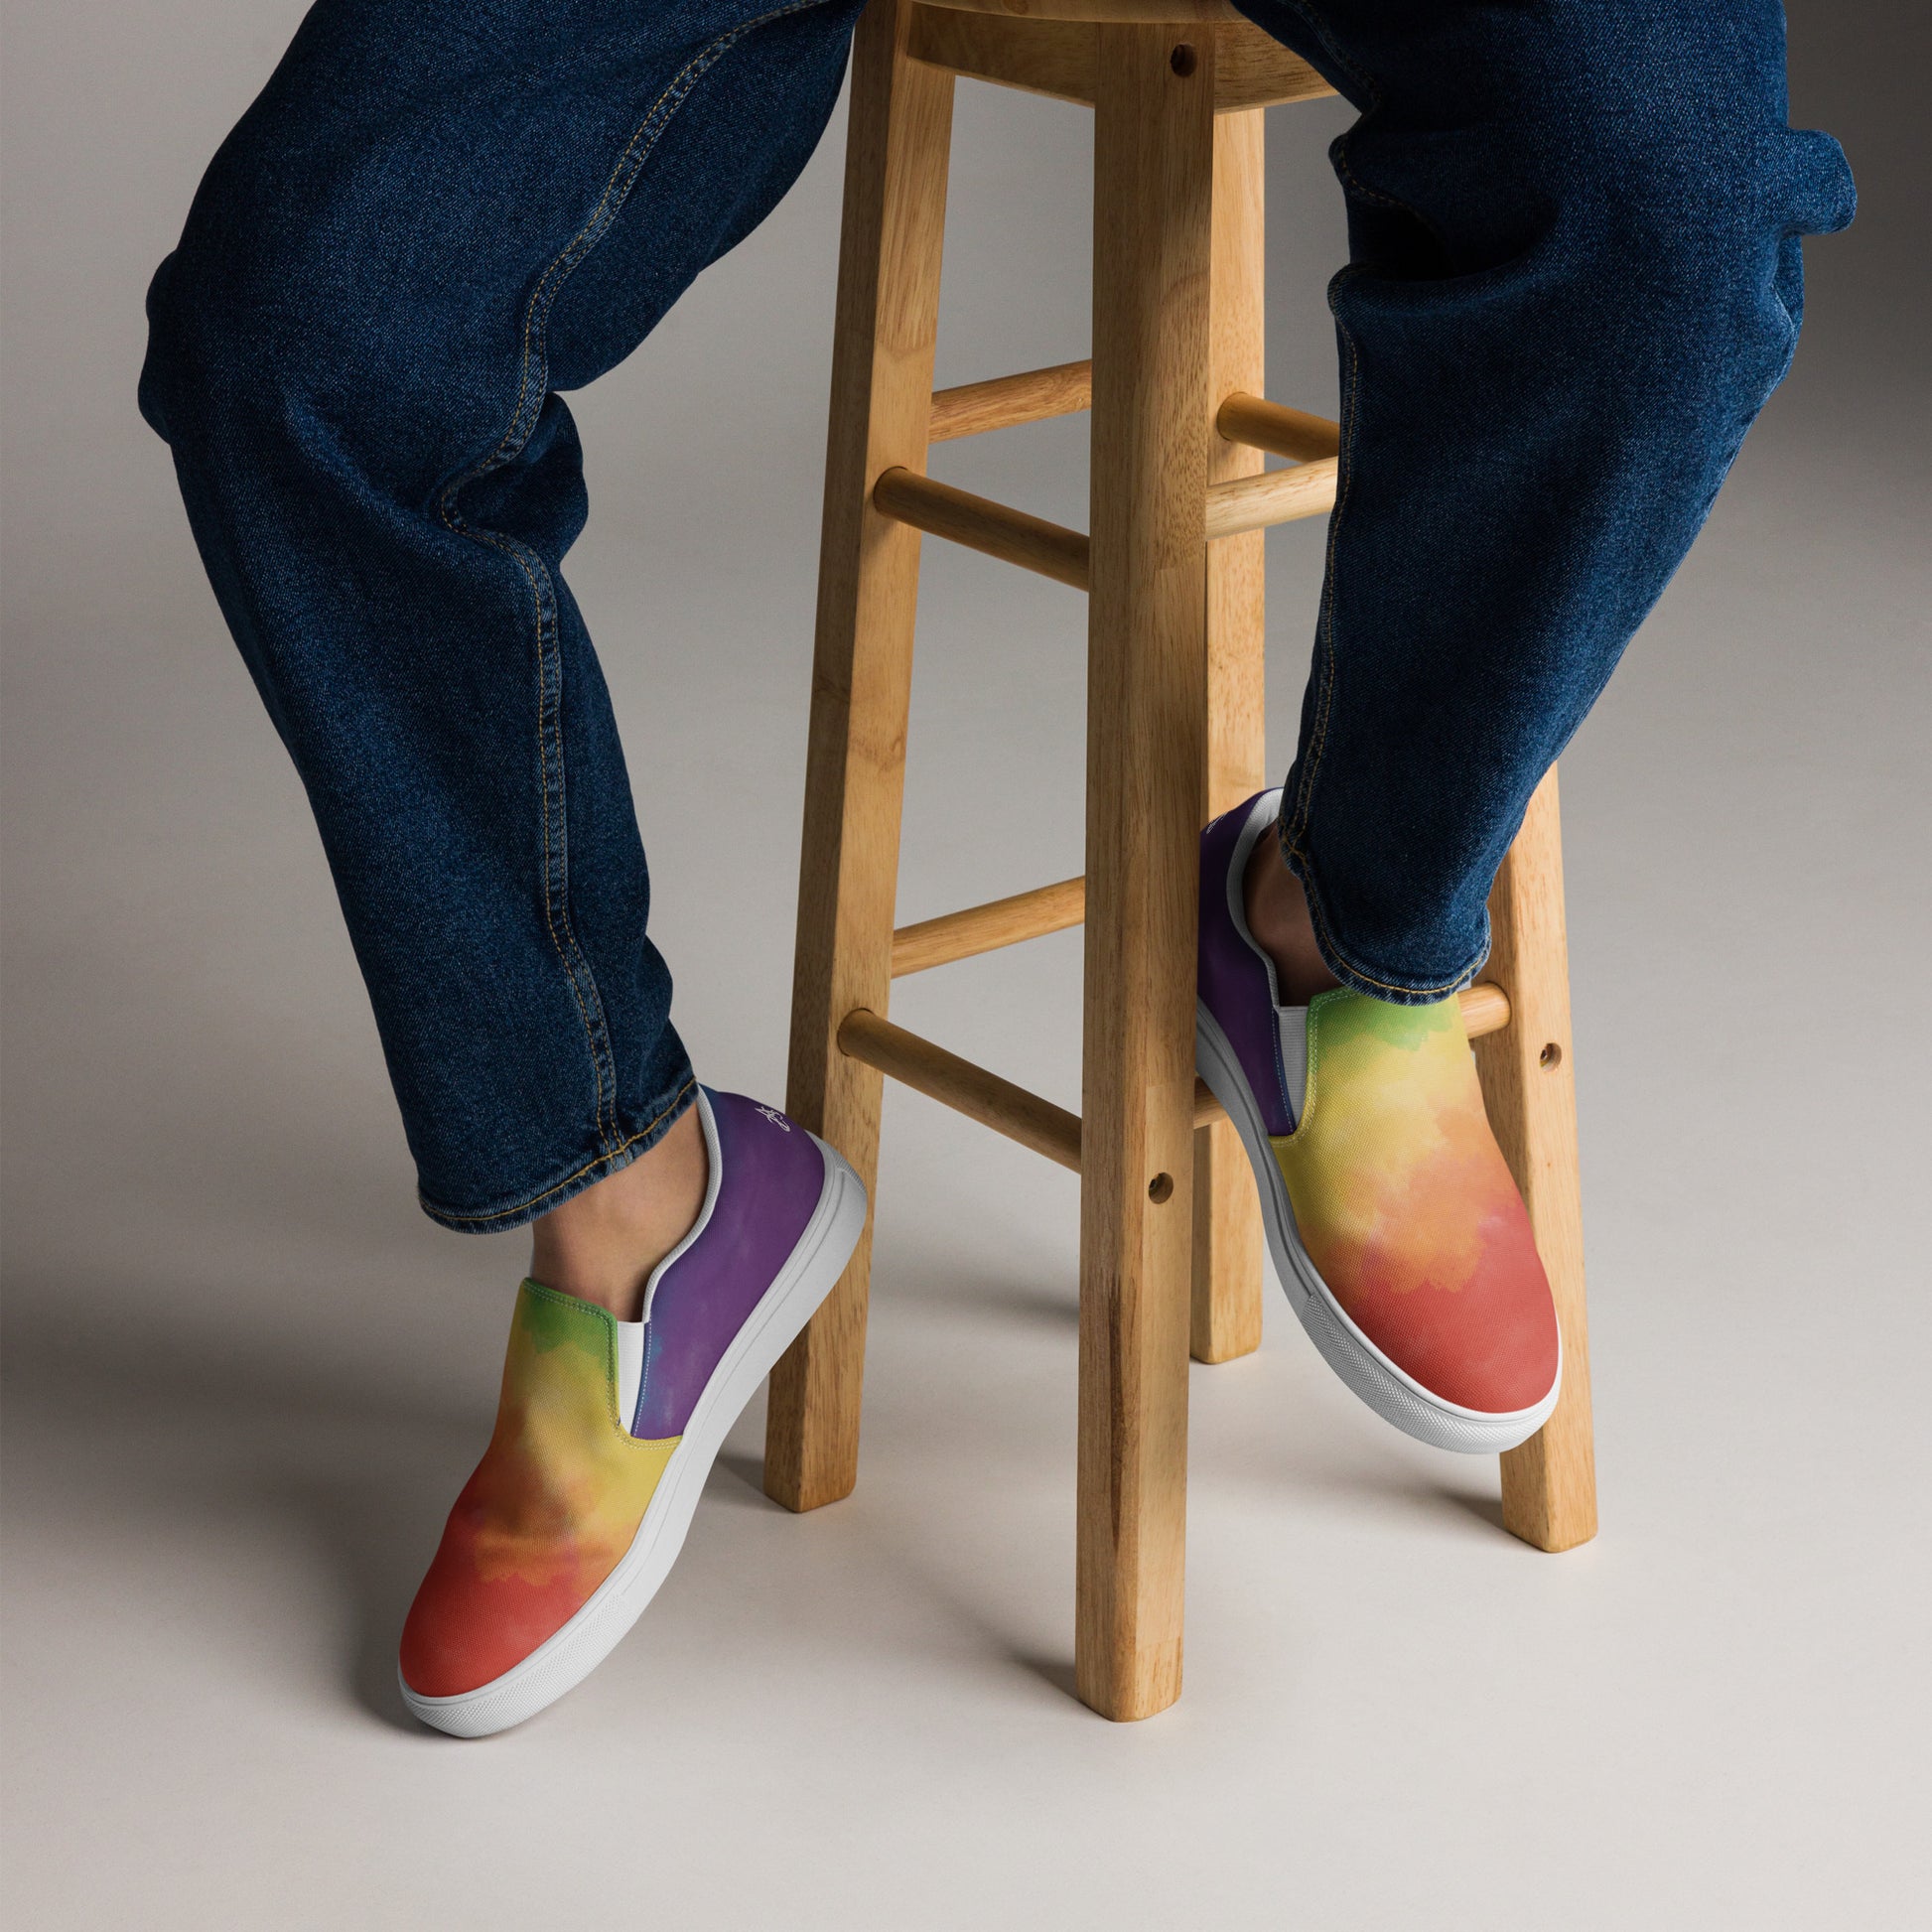 A model wears the cloudy rainbow pride slip on shoes and sits on a stool.